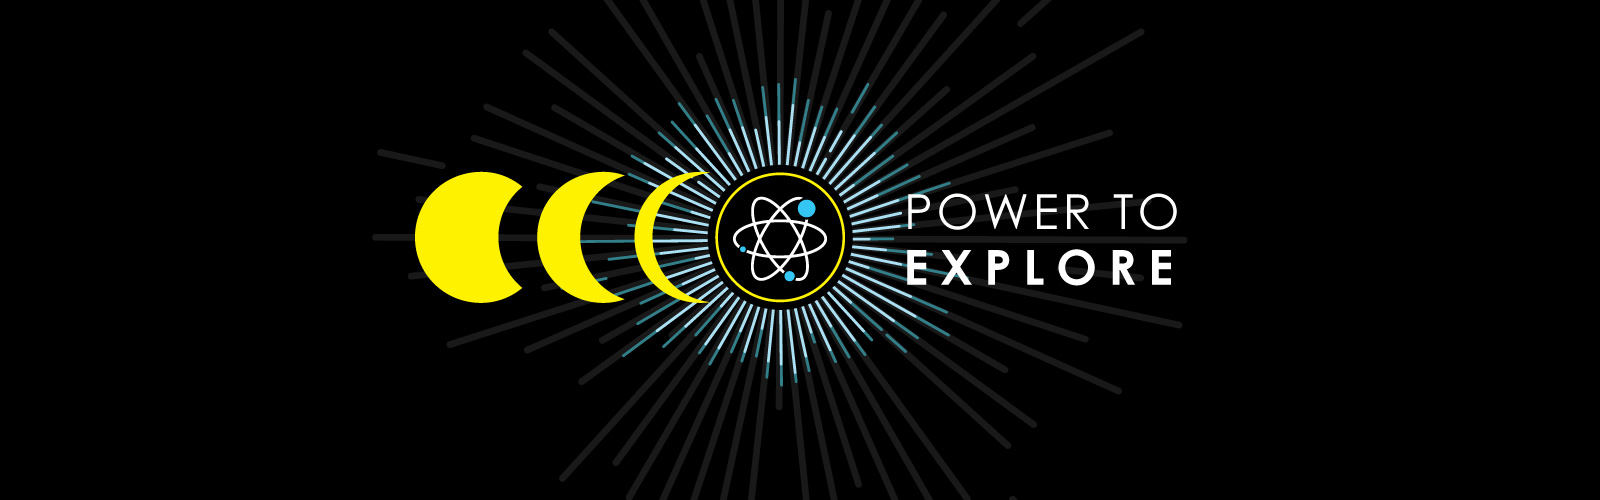 The power to explore logo combines an artistic suggestion of an eclipse with the universal symbol for nuclear energy.